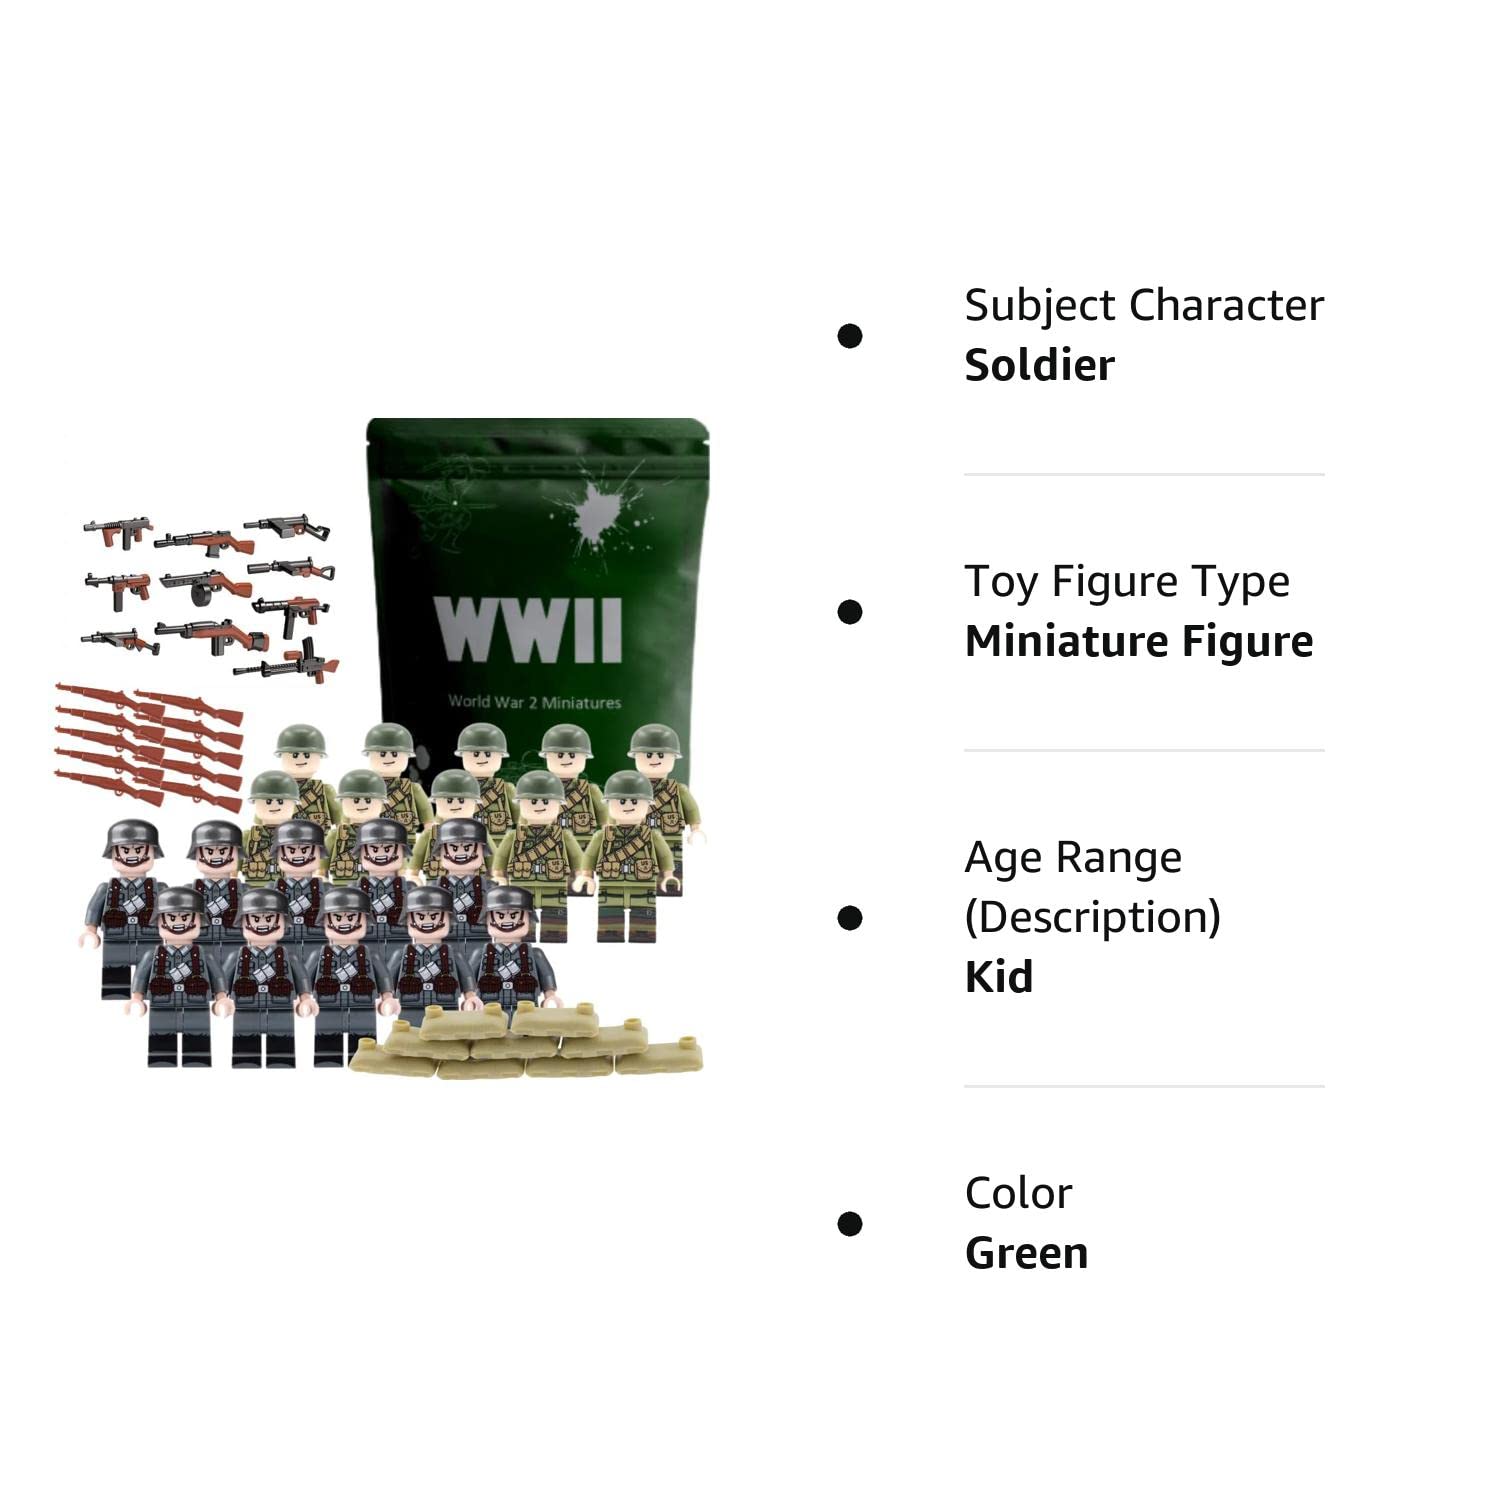 WW2 Toy Soldier Figures American vs German Army Battle Playset (50 pcs) -  World War 2 Building Block Toy Military Set US and German Armies, Weapons,  Sand Bags 